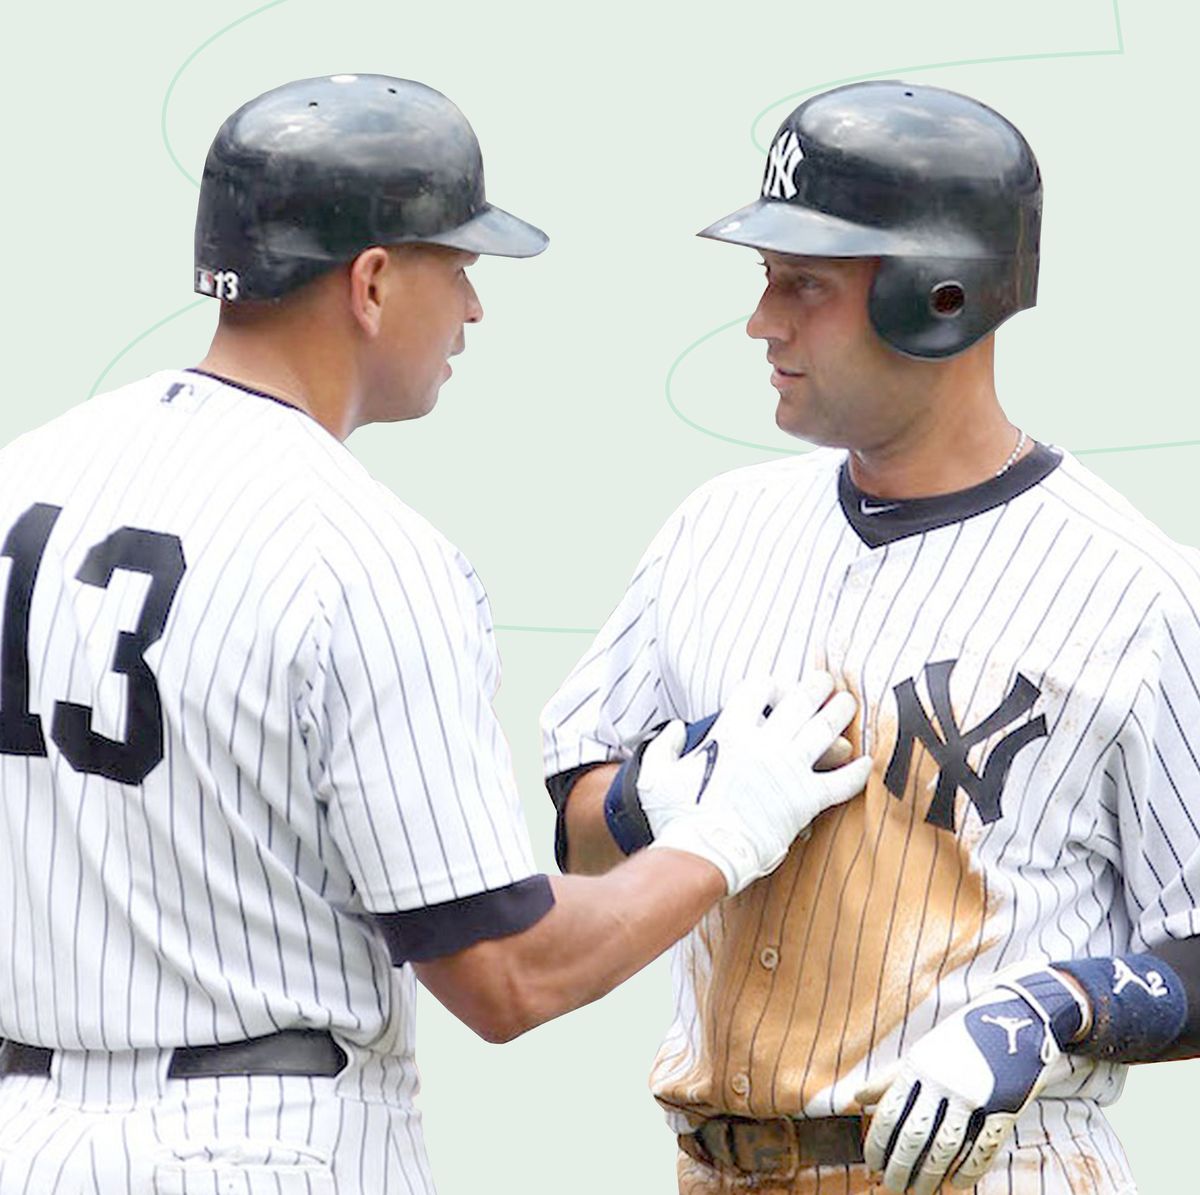 Derek Jeter Admits 2001 Interview Led to Fall Out with Alex Rodriguez